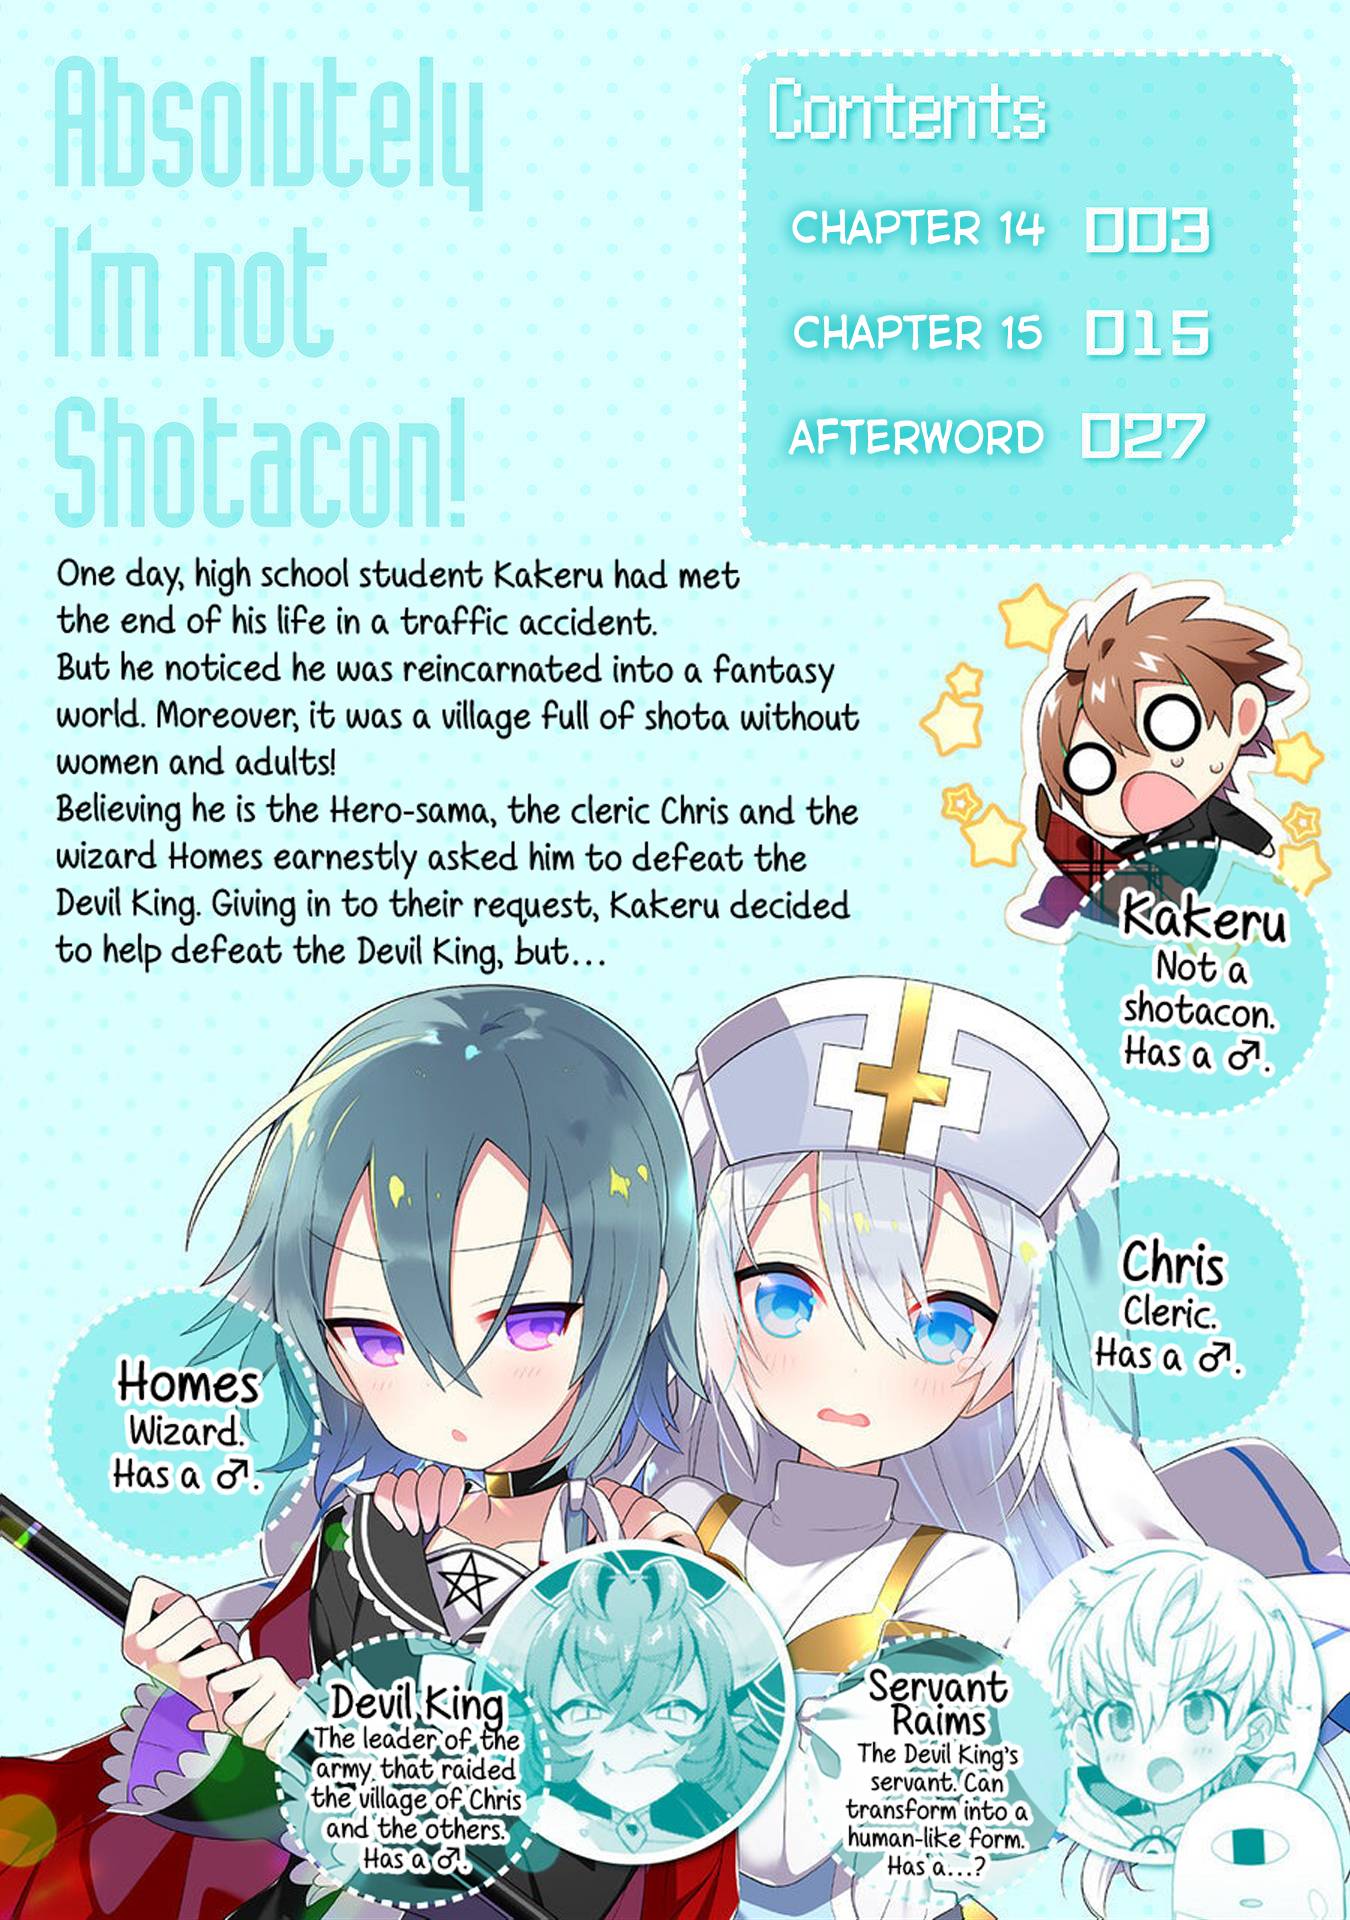 After Reincarnation, My Party Was Full Of Boys, But I'm Not A Shotacon! - chapter 14 - #1